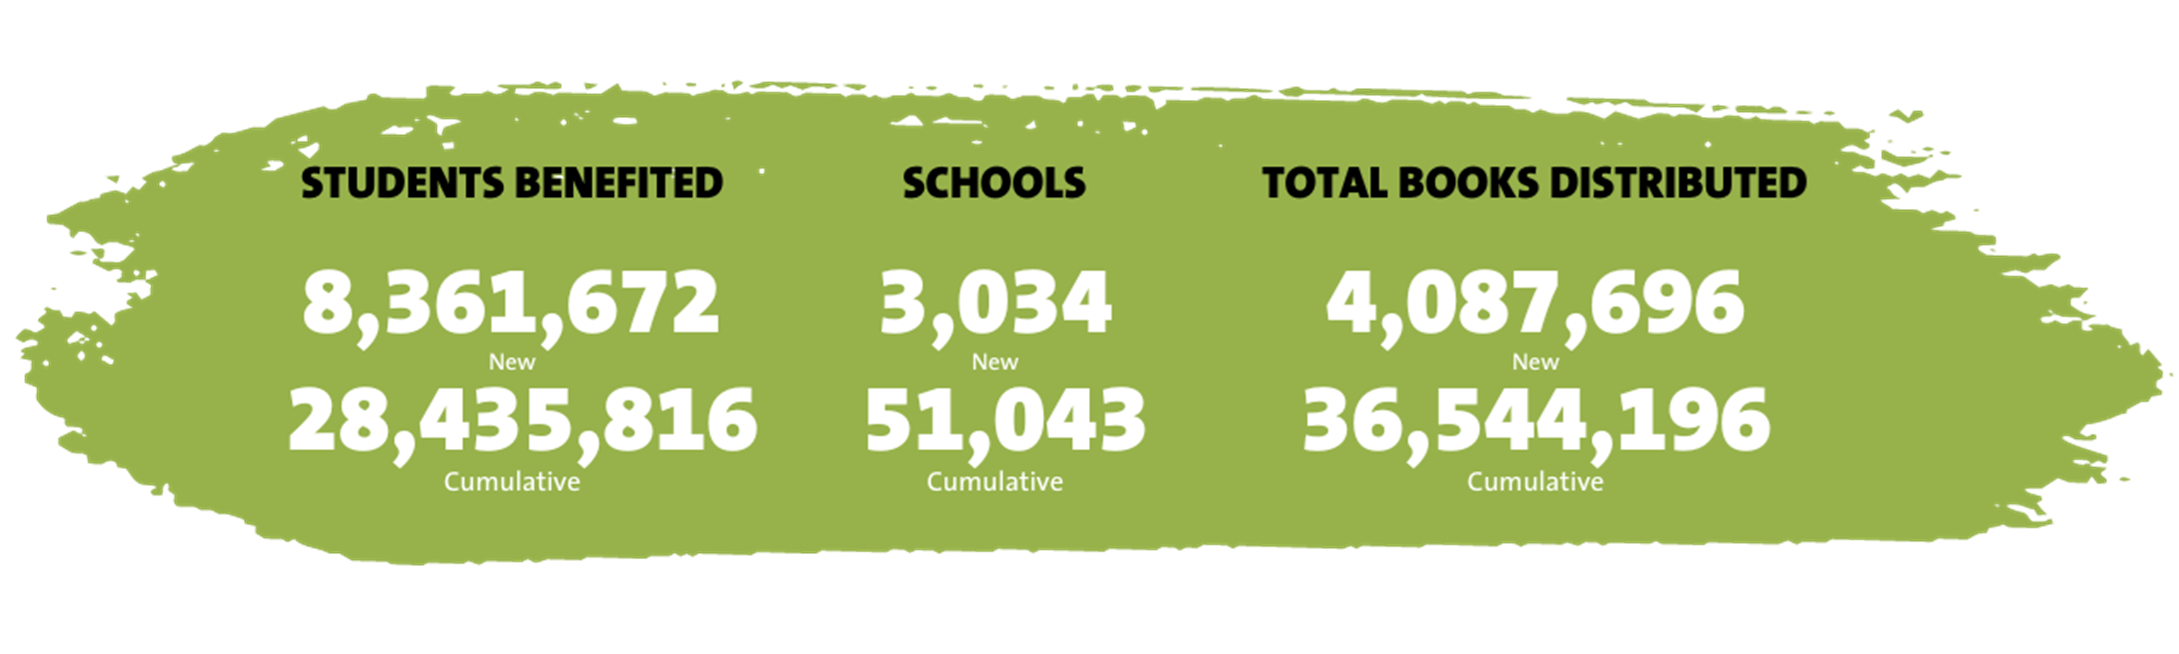 Green paint background with text overlay that reads "Students Benefited: 8,261,672 New and 28,435,816 Cumulative" and "Schools: 3,034 New and 51,043 Cumulative" and "Total Books Distributed: 4,087,696 New and 36,544,196 Cumulative"